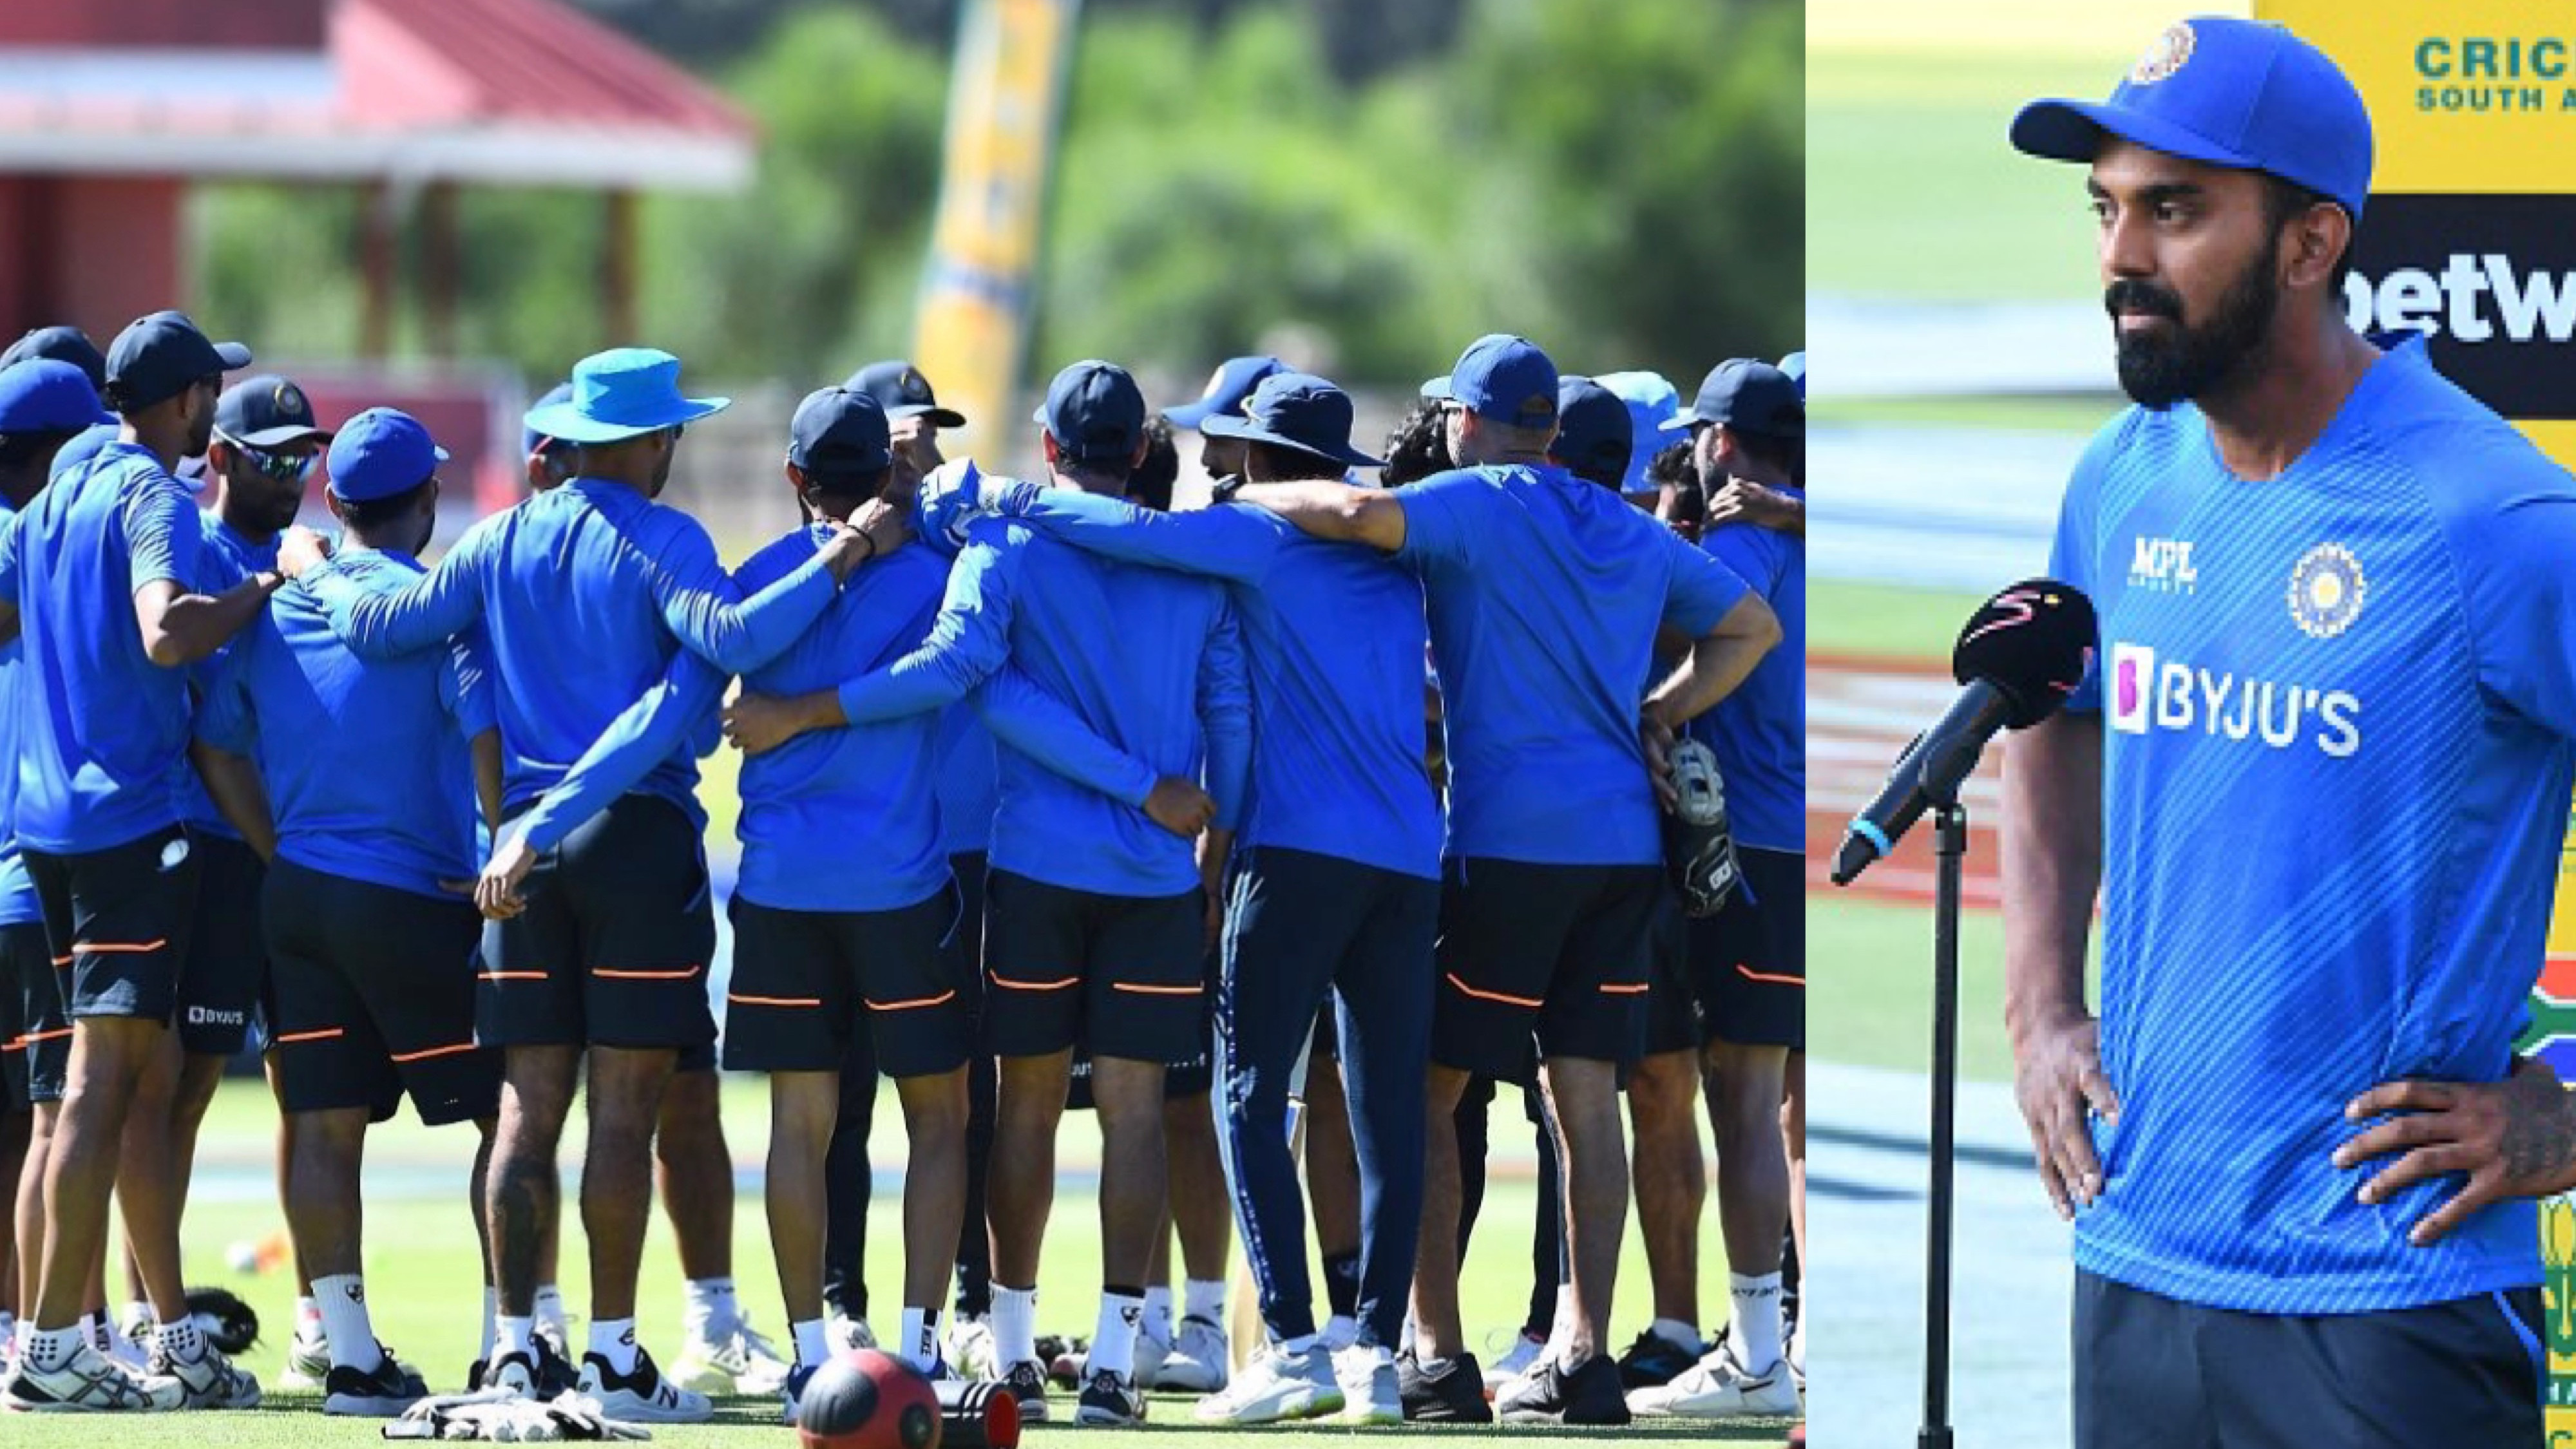 SA v IND 2021-22: “Difficult journeys help you improve and grow stronger” KL Rahul pens note after tough tour